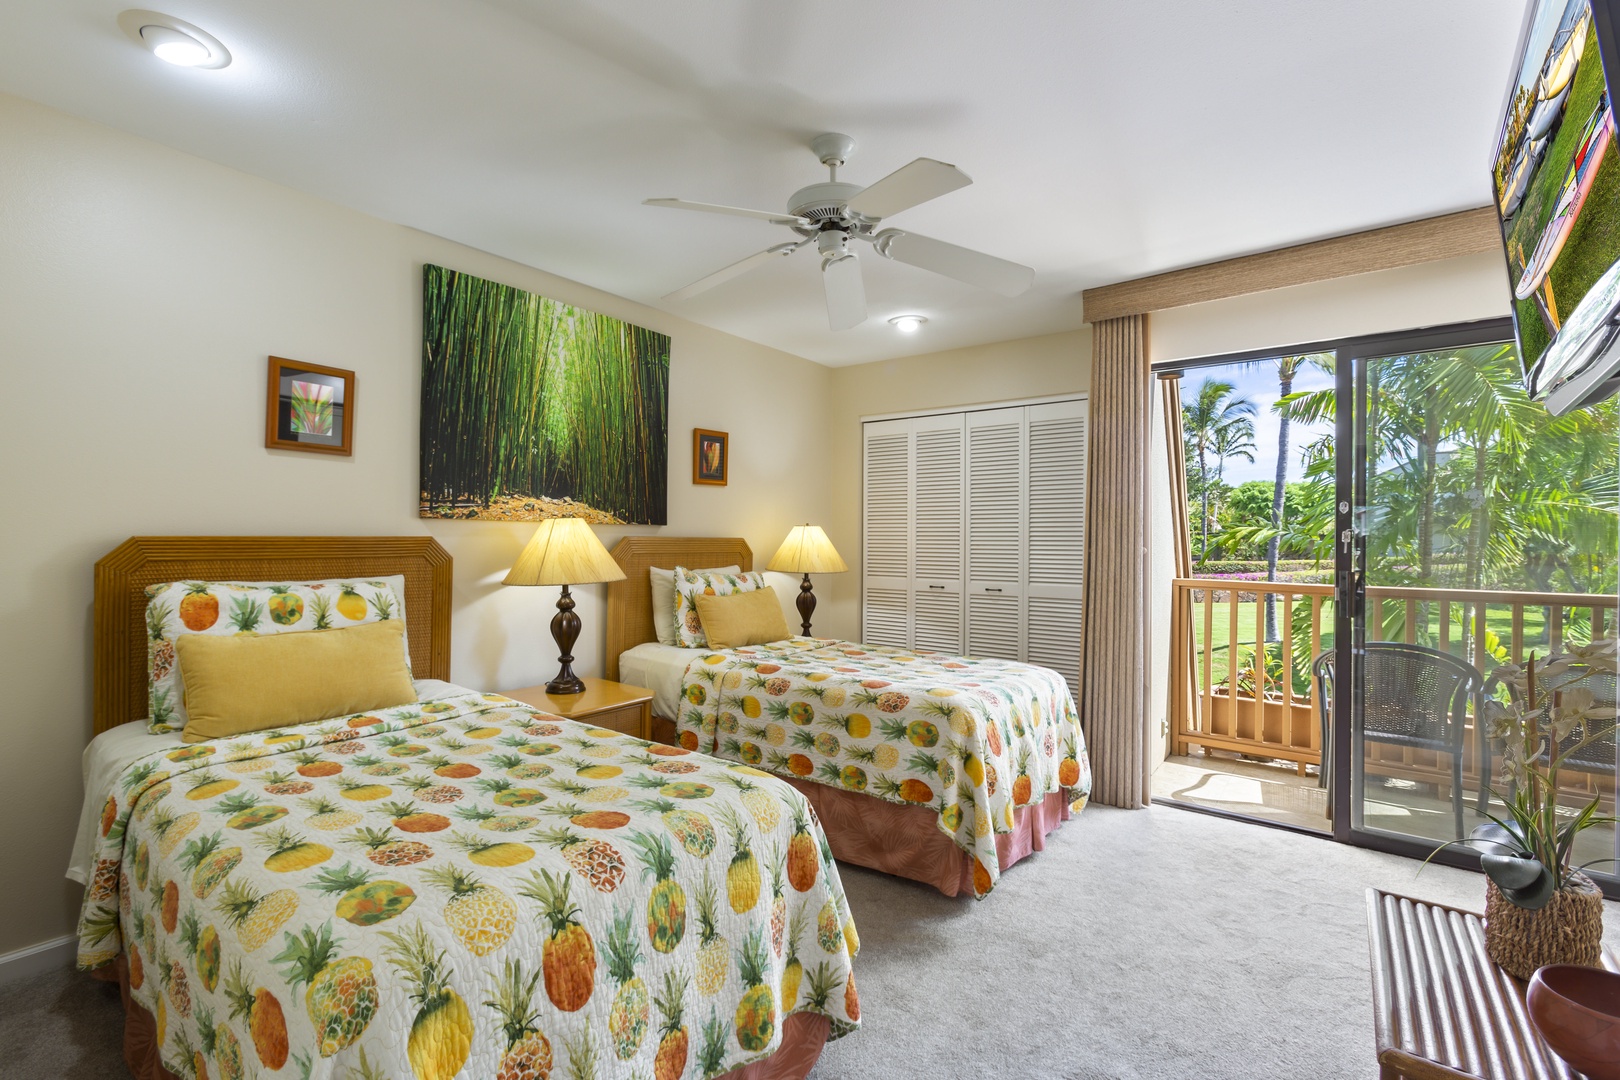 Bedroom 2 with 2 Twin beds (can be converted into a short king), lanai, and TV